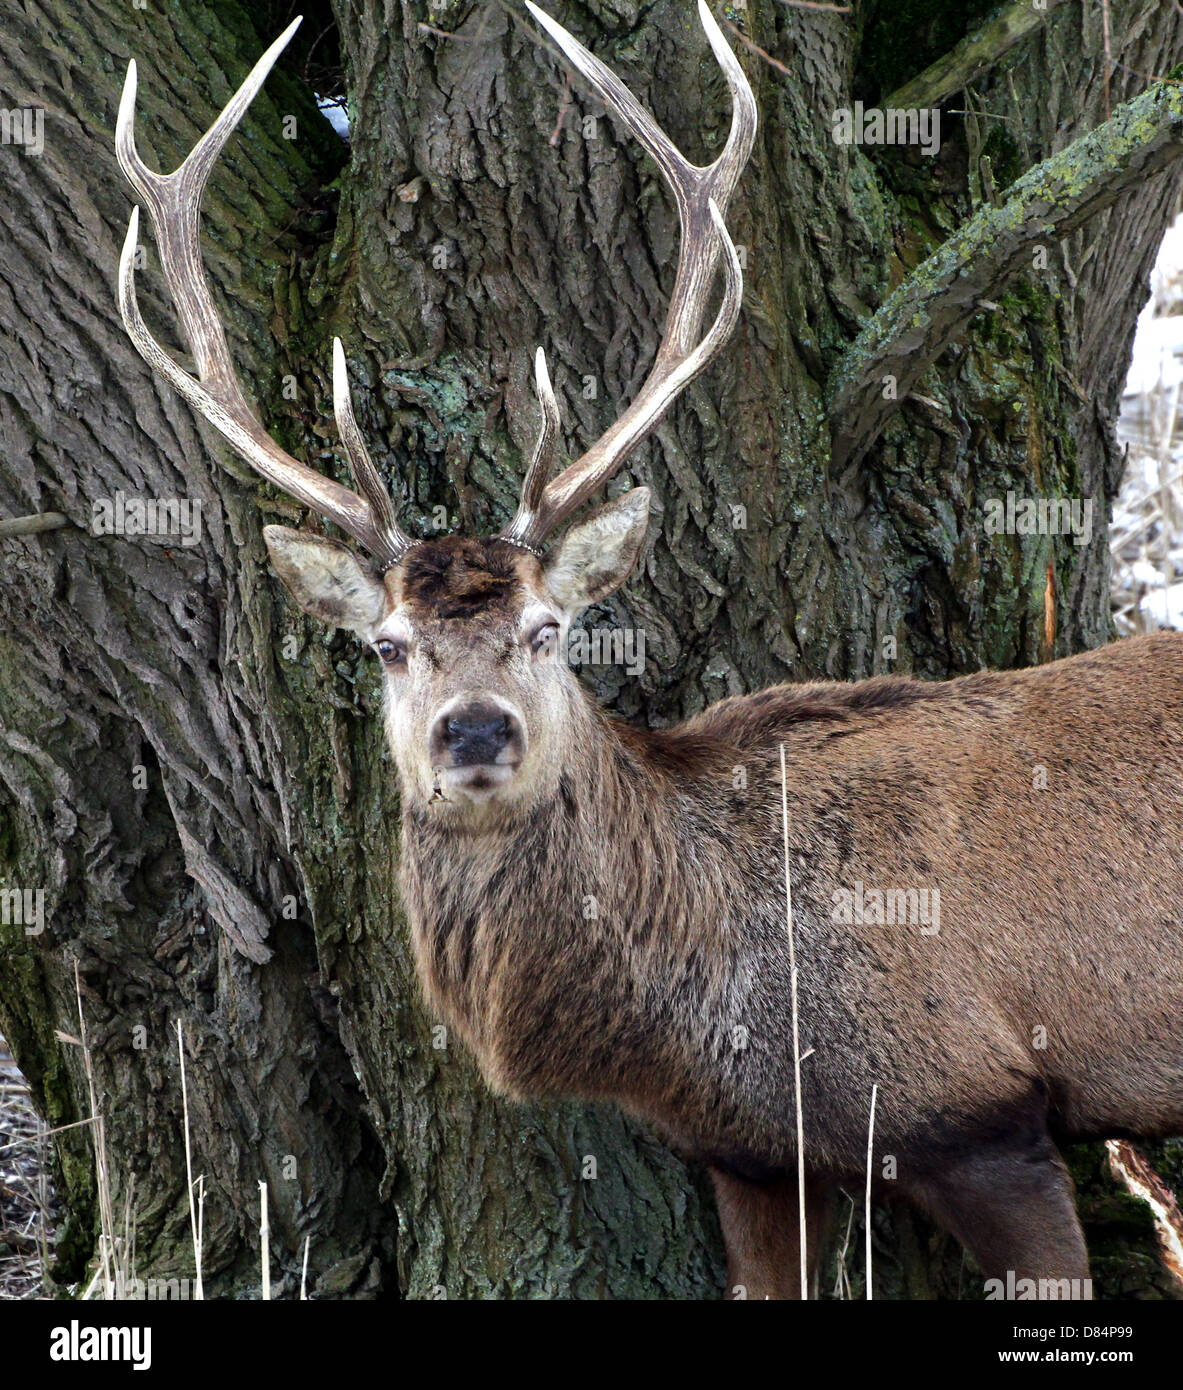 Close-up of a mature antlered  Red Deer stag (Cervus elaphus) in a winter setting Stock Photo